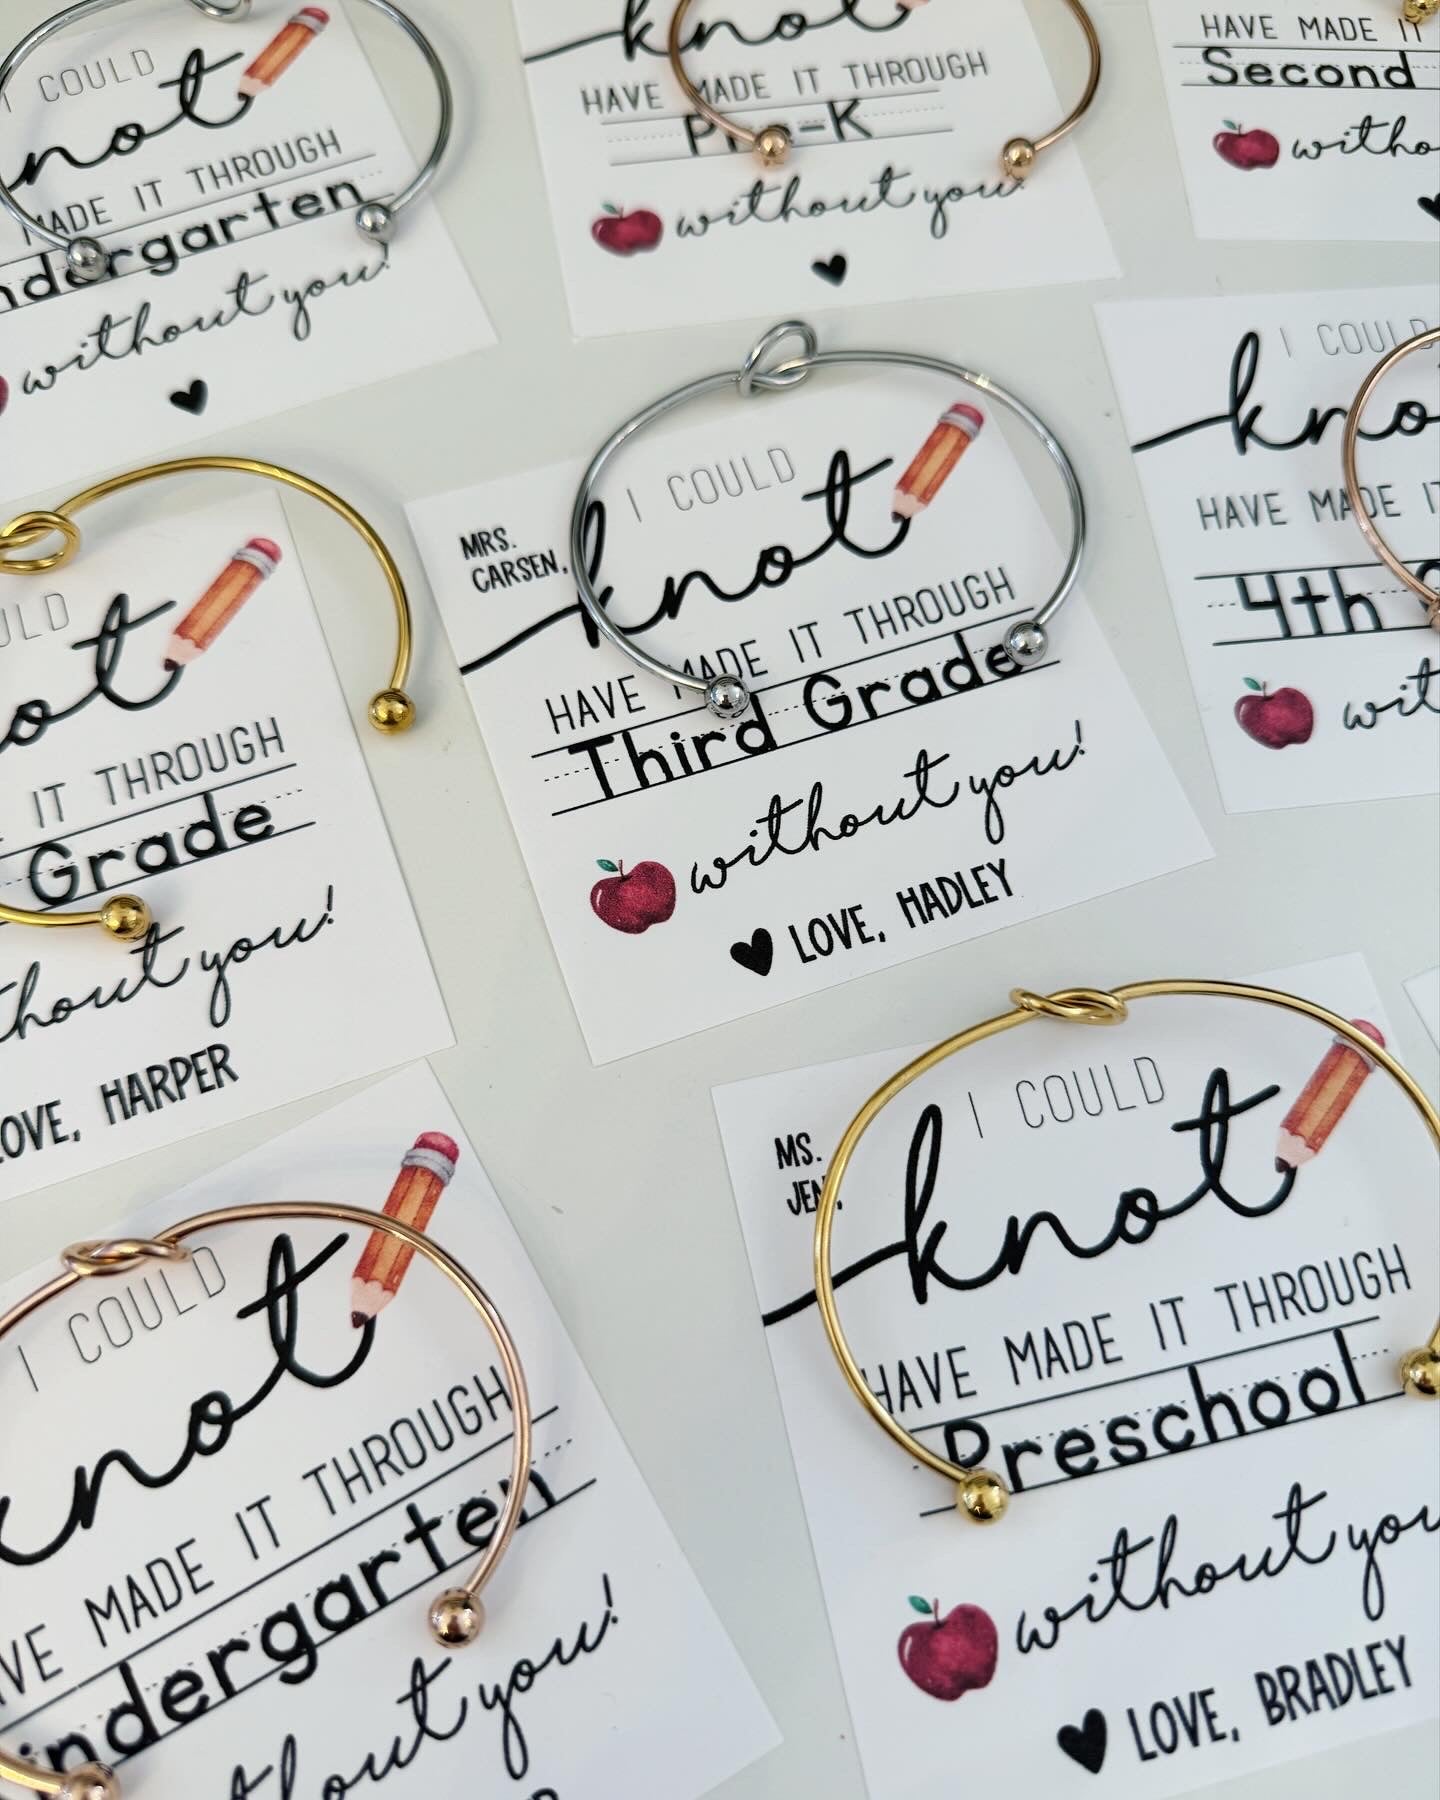 Teacher Appreciation End of Year Teacher Gift Knot Bangle! NON-TARNISH, Personalized card, bangle, box & ribbon included too!